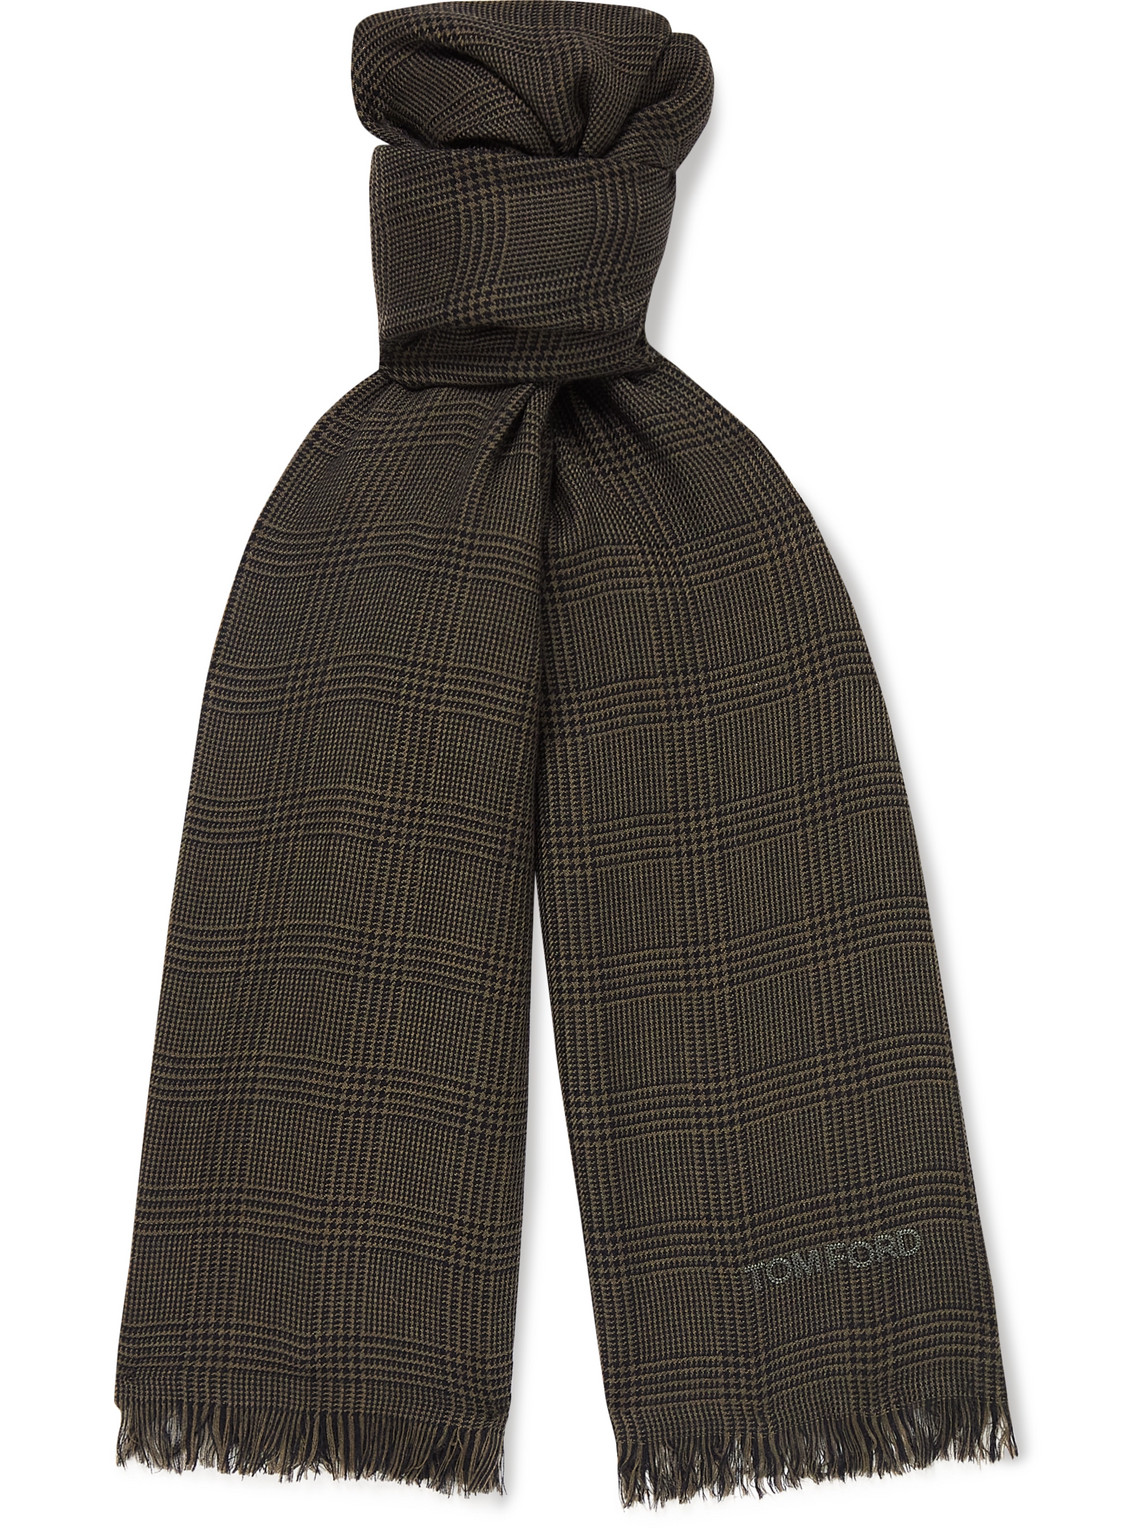 TOM FORD PRINCE OF WALES CHECKED WOOL SCARF